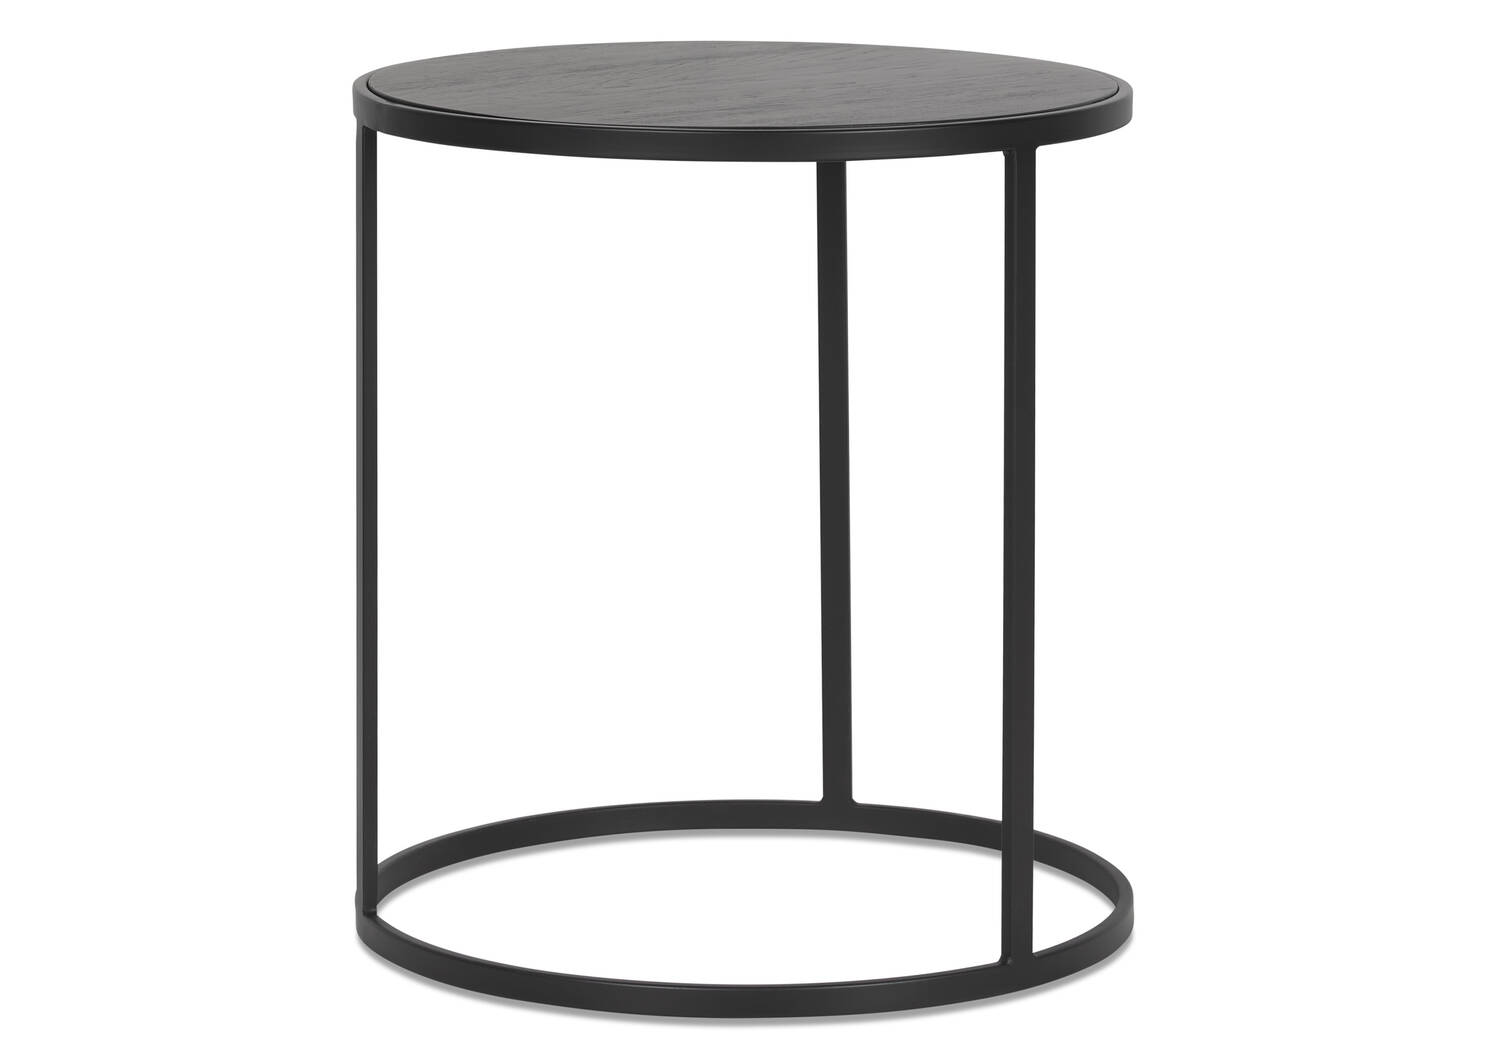 Madera Side Table -Carbon